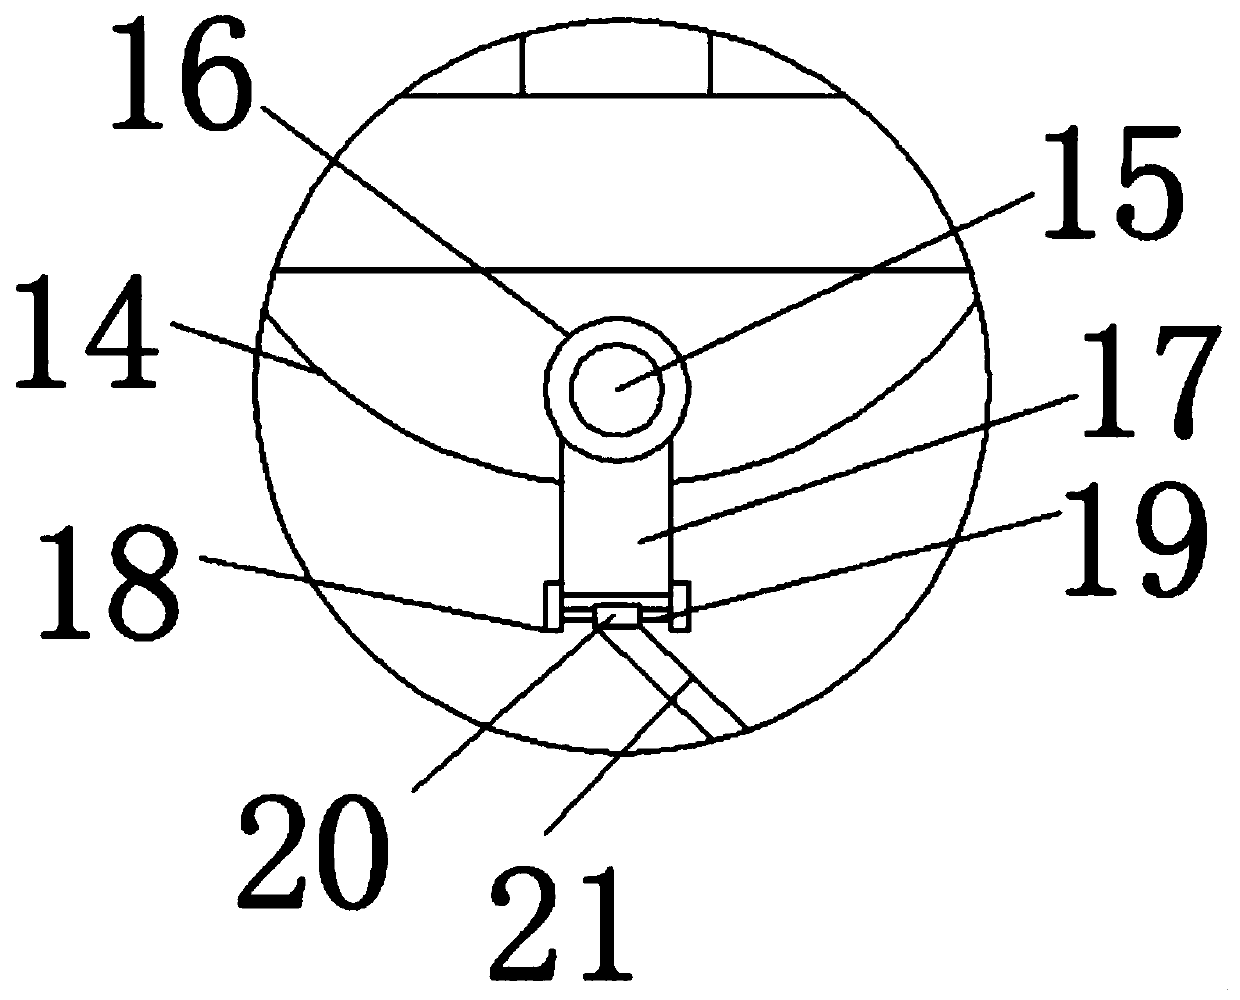 Auxiliary interference device and method for training of basketball shooting